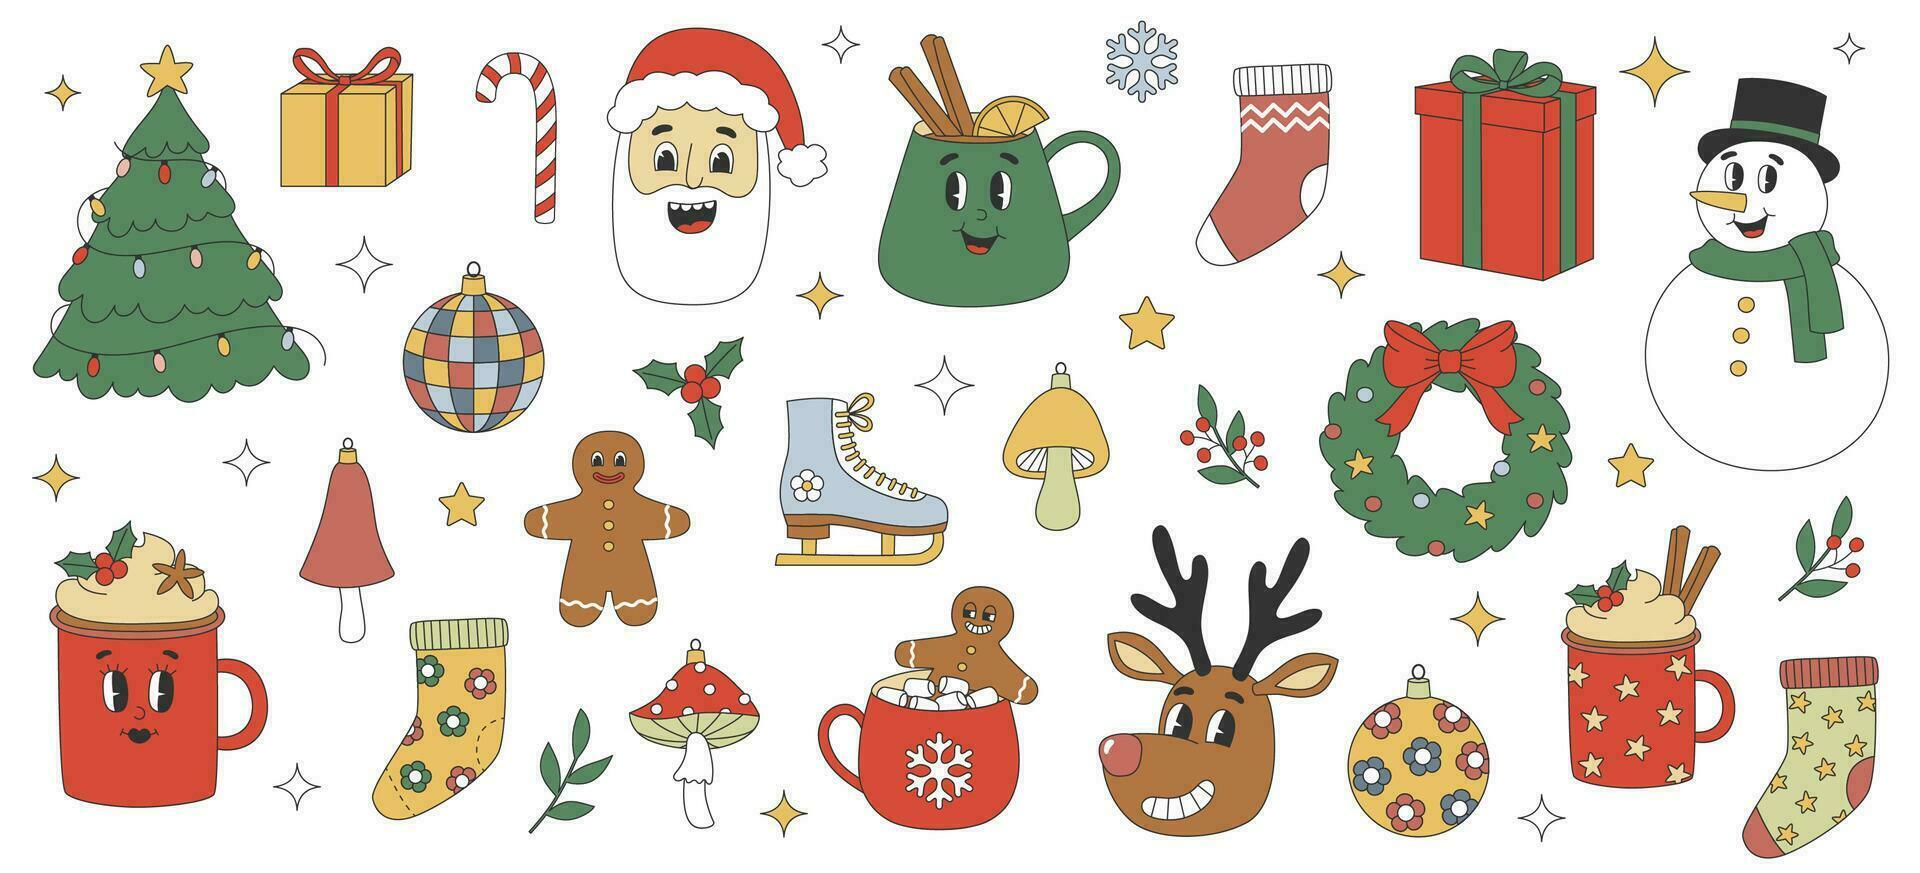 Sticker pack of cartoon Christmas characters and elements. Santa, snowman, reindeer, gingerbread man in trendy retro cartoon style. vector